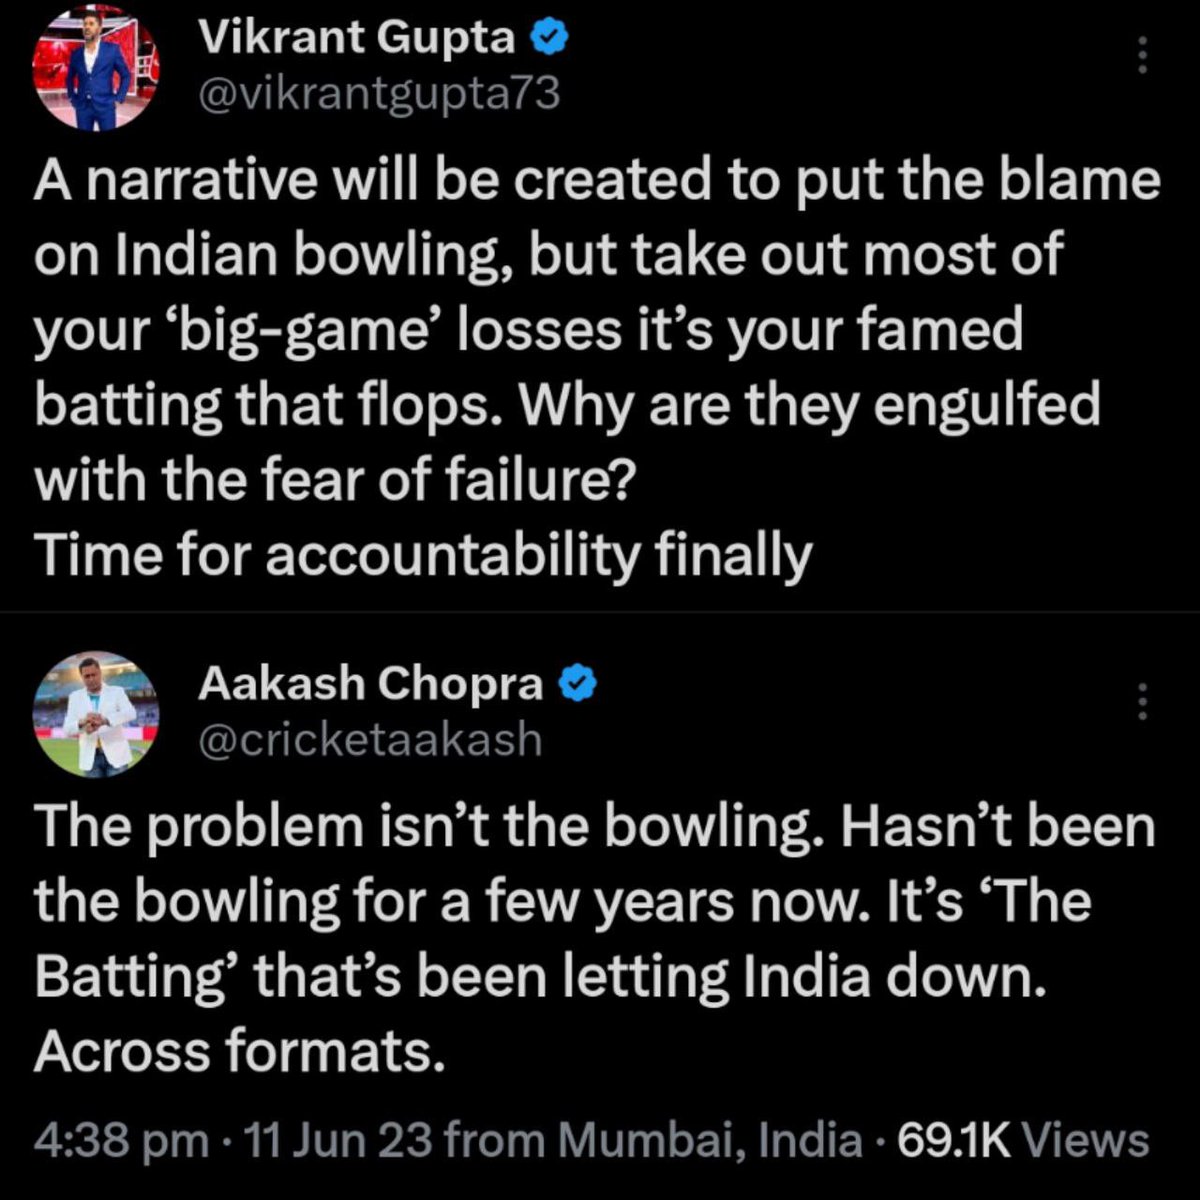 That's how PR machinery of Rohit Sharma starts working. Suddenly the blame is on the batsman and no one talking about the Captaincy and 444 runs being conceded